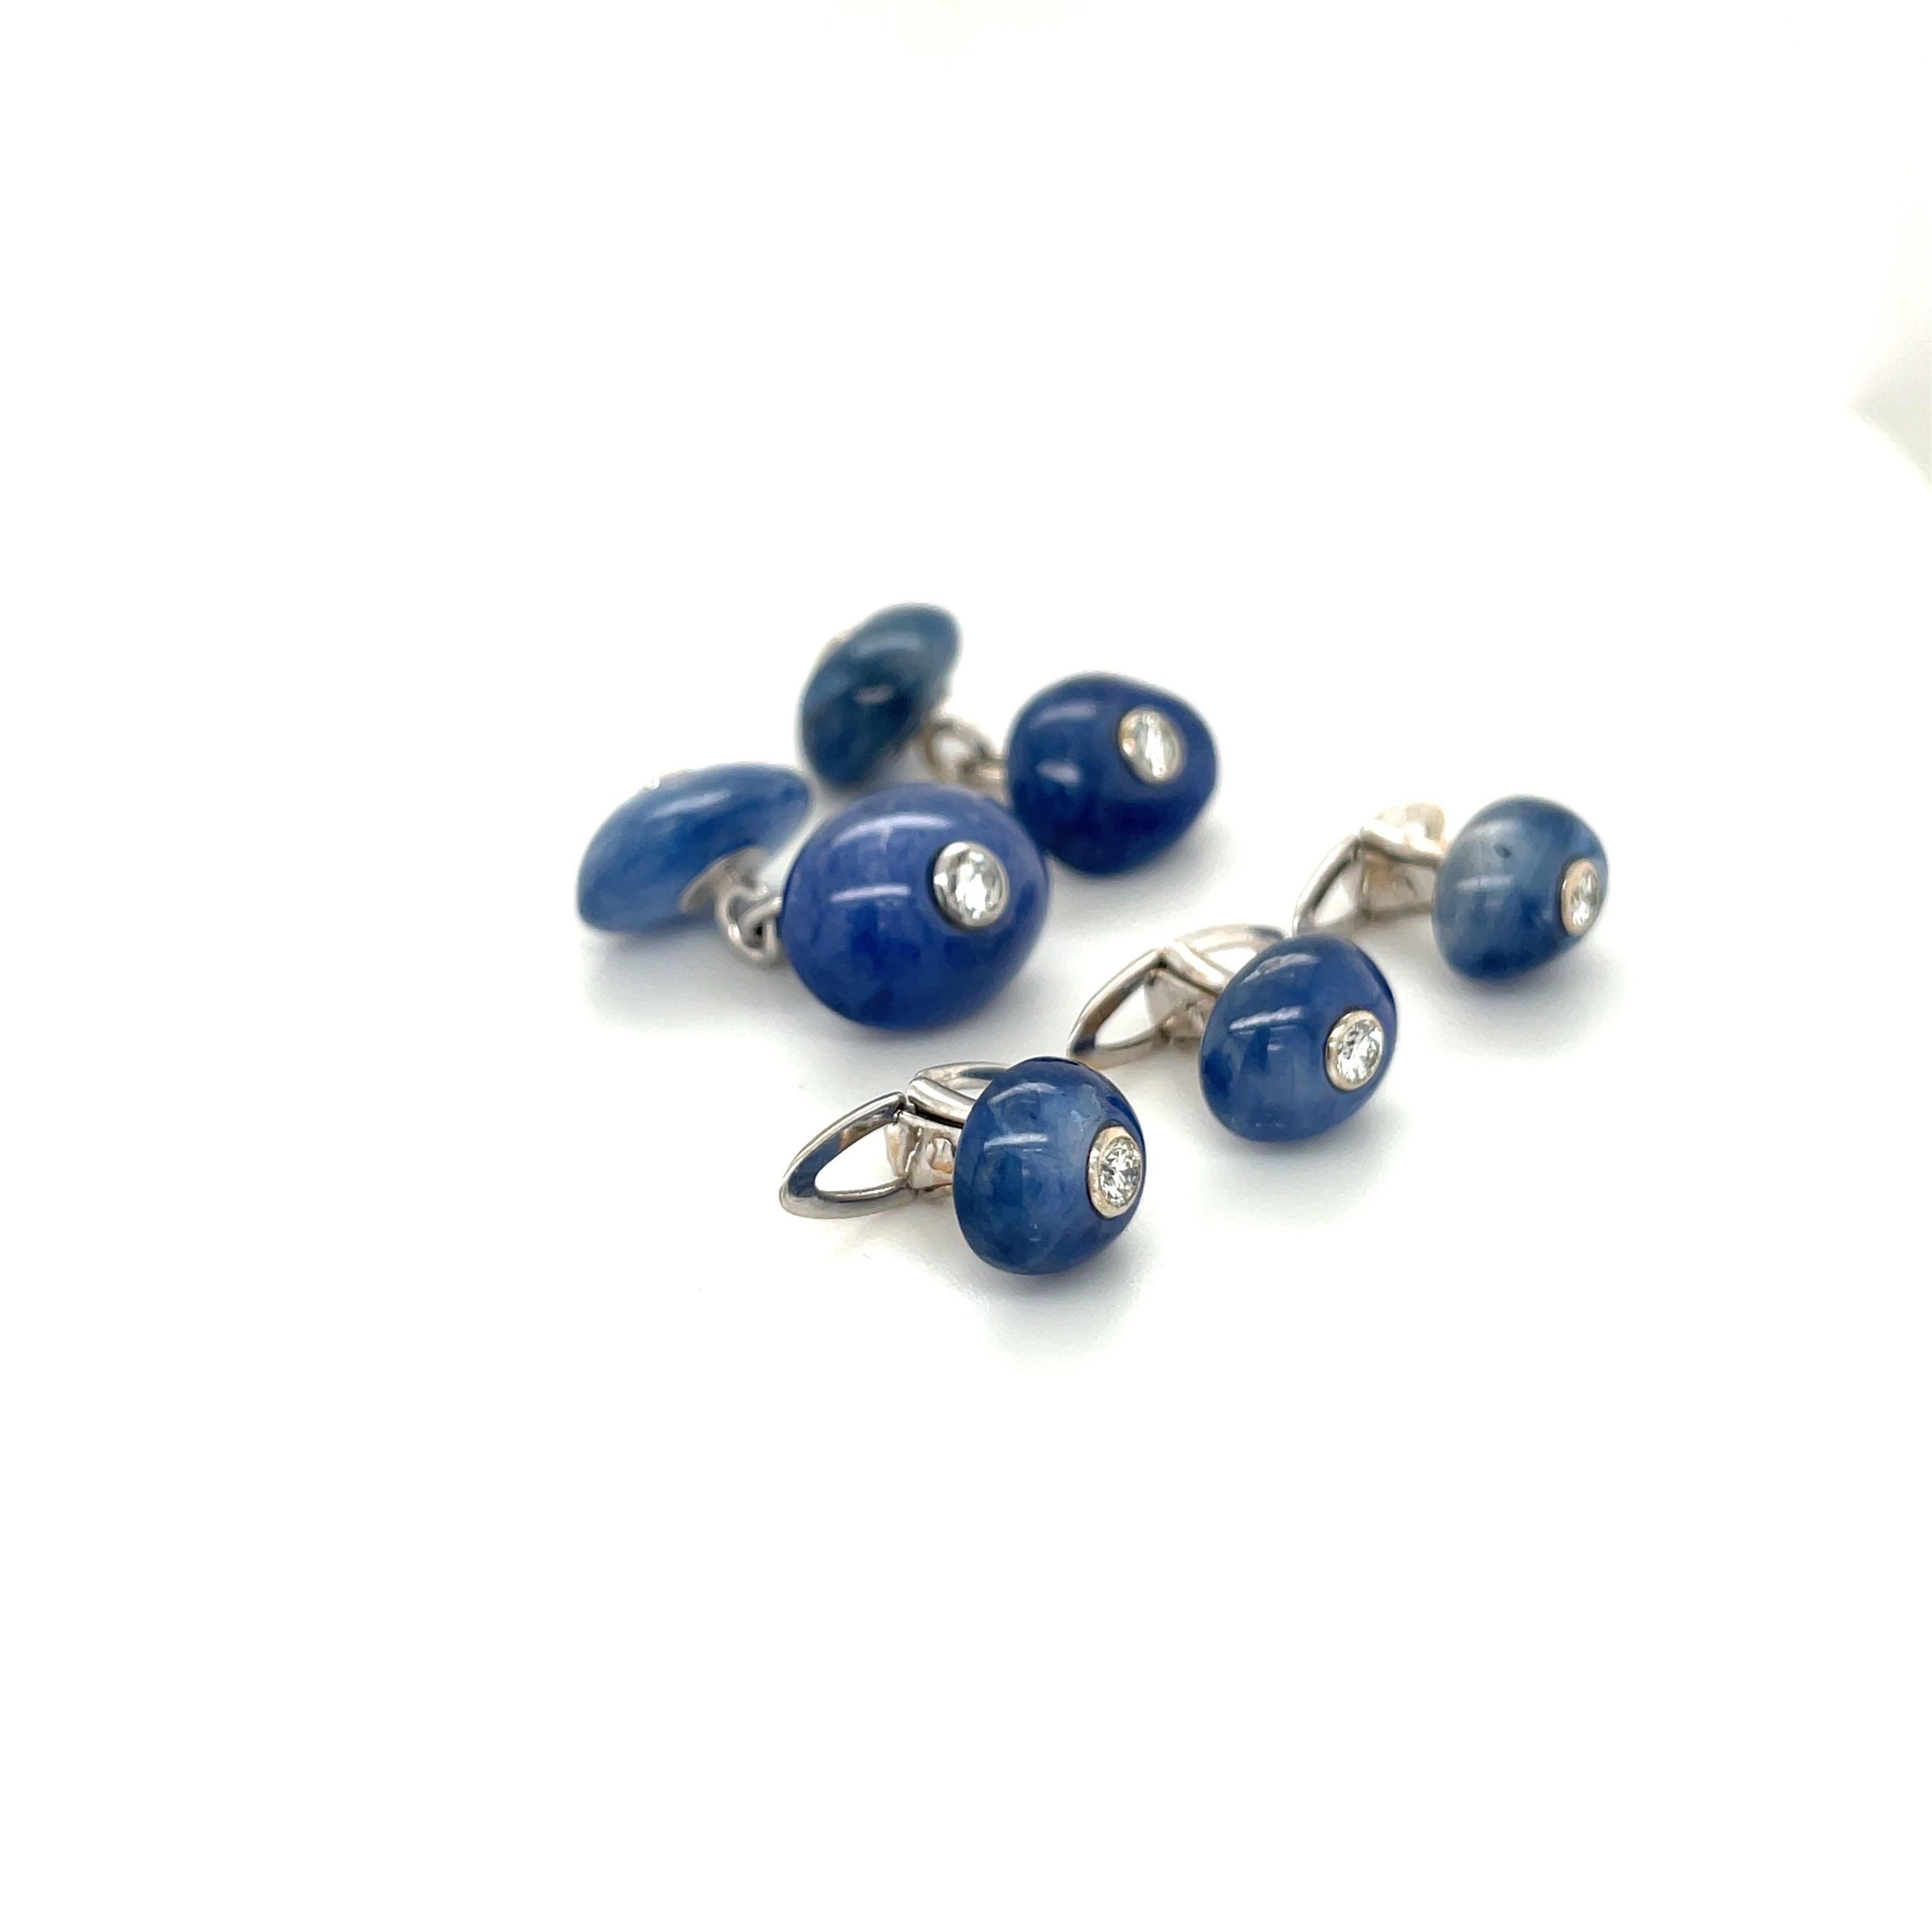 This 18 karat white gold cuff-link /3 stud dress set is designed with polished natural blue sapphire stones. Each sapphire has a bezel set diamond center. The cuff-links are double sided with a chain.
Blue Sapphire Cuff Links =28.00 ct  Diamonds